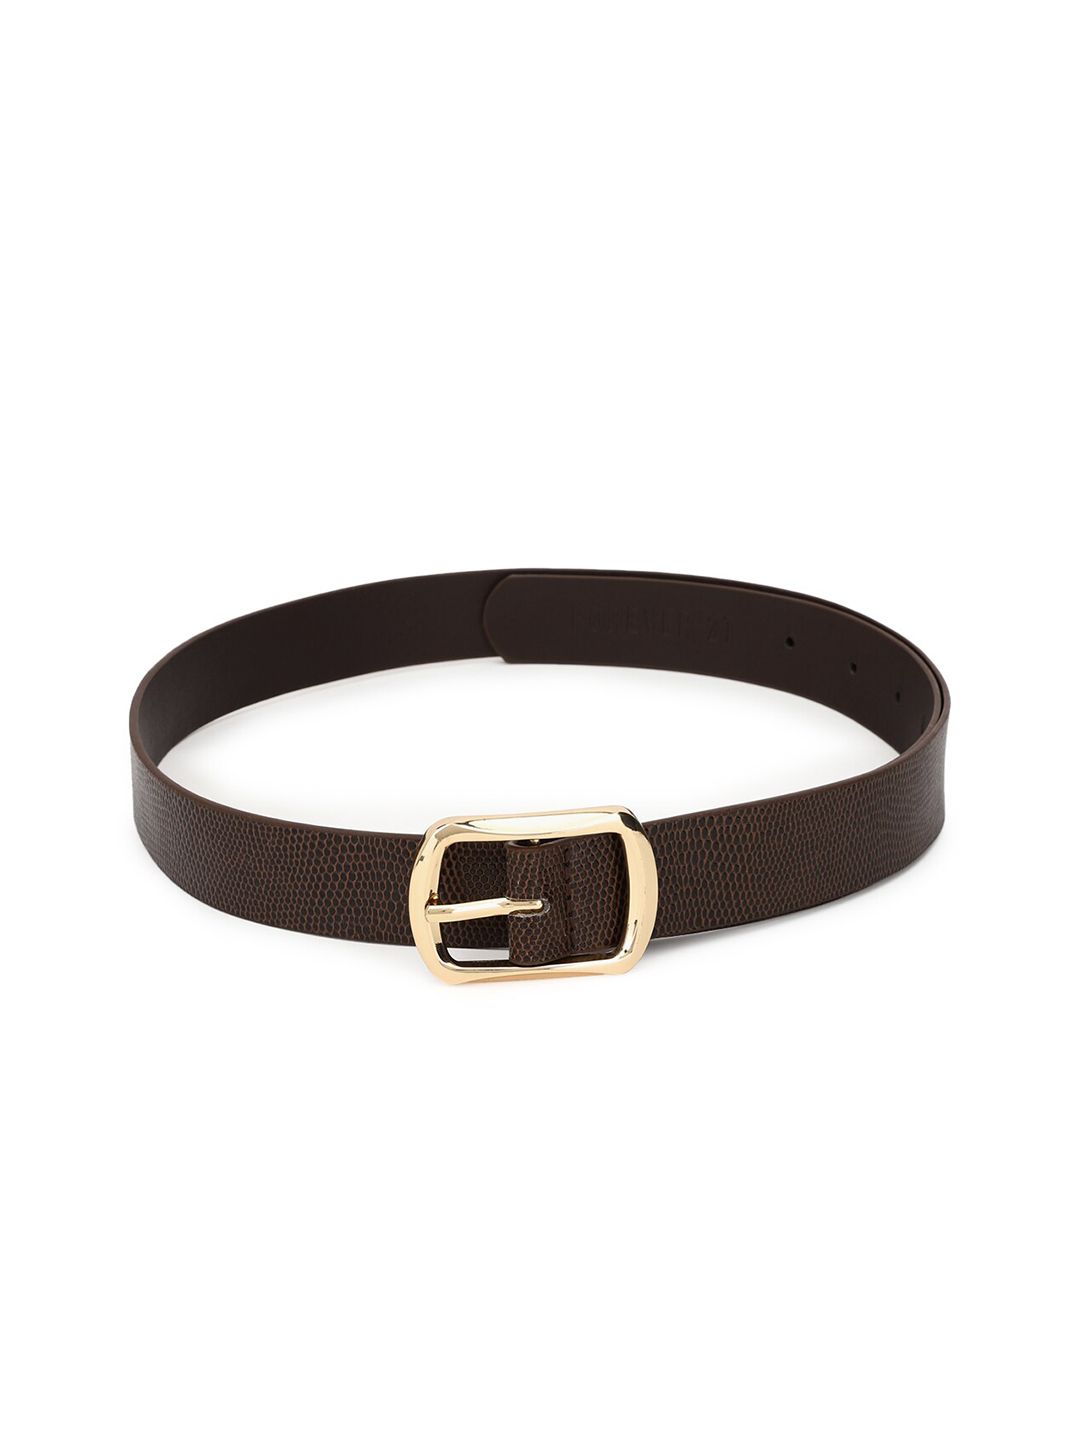 FOREVER 21 Women Brown PU Belt Price in India